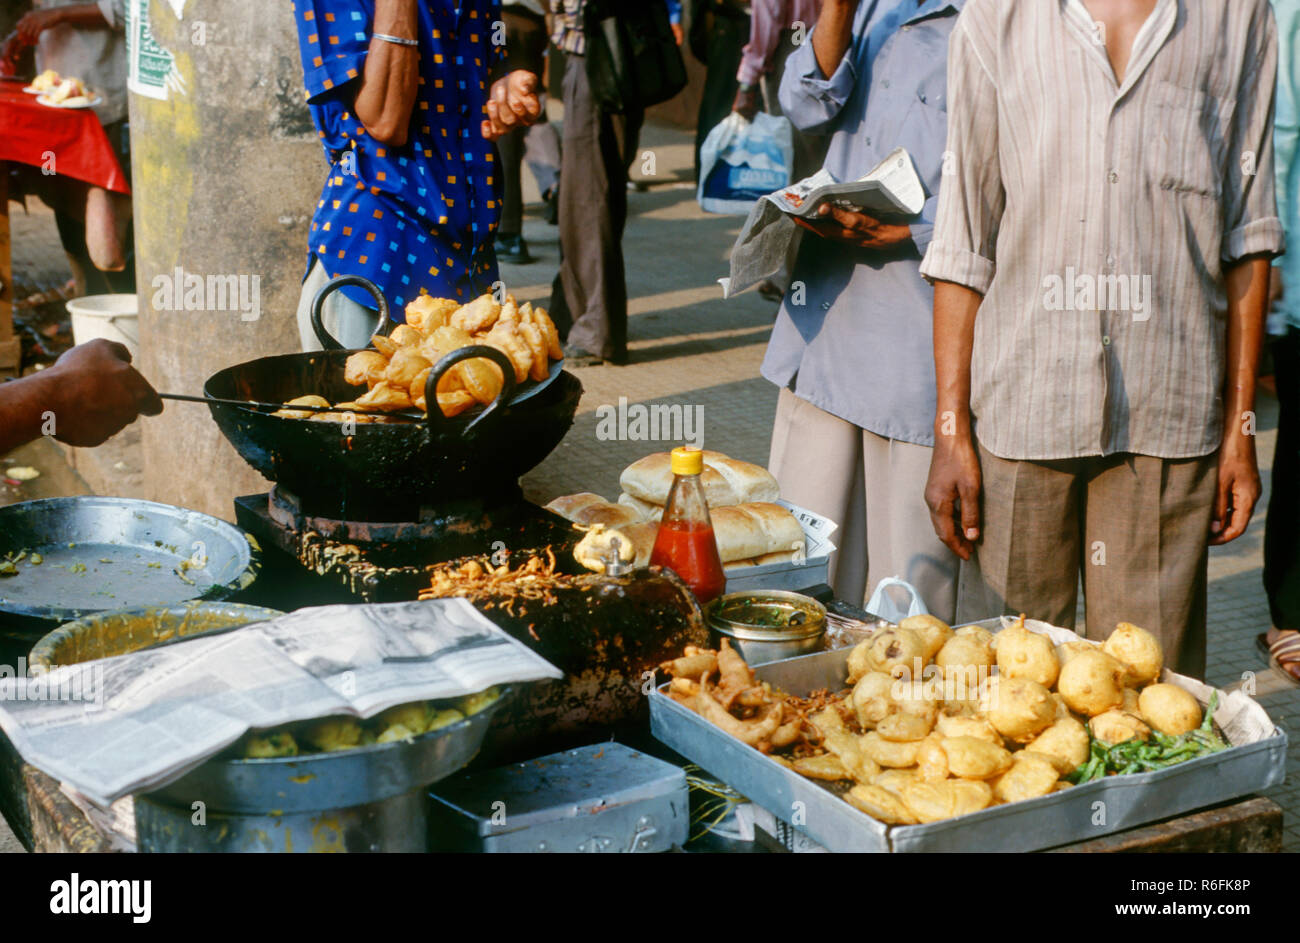 Snacks, Groundnut Cooking Oil Used for Frying Vadas on Roadside Food Stall, India Stock Photo